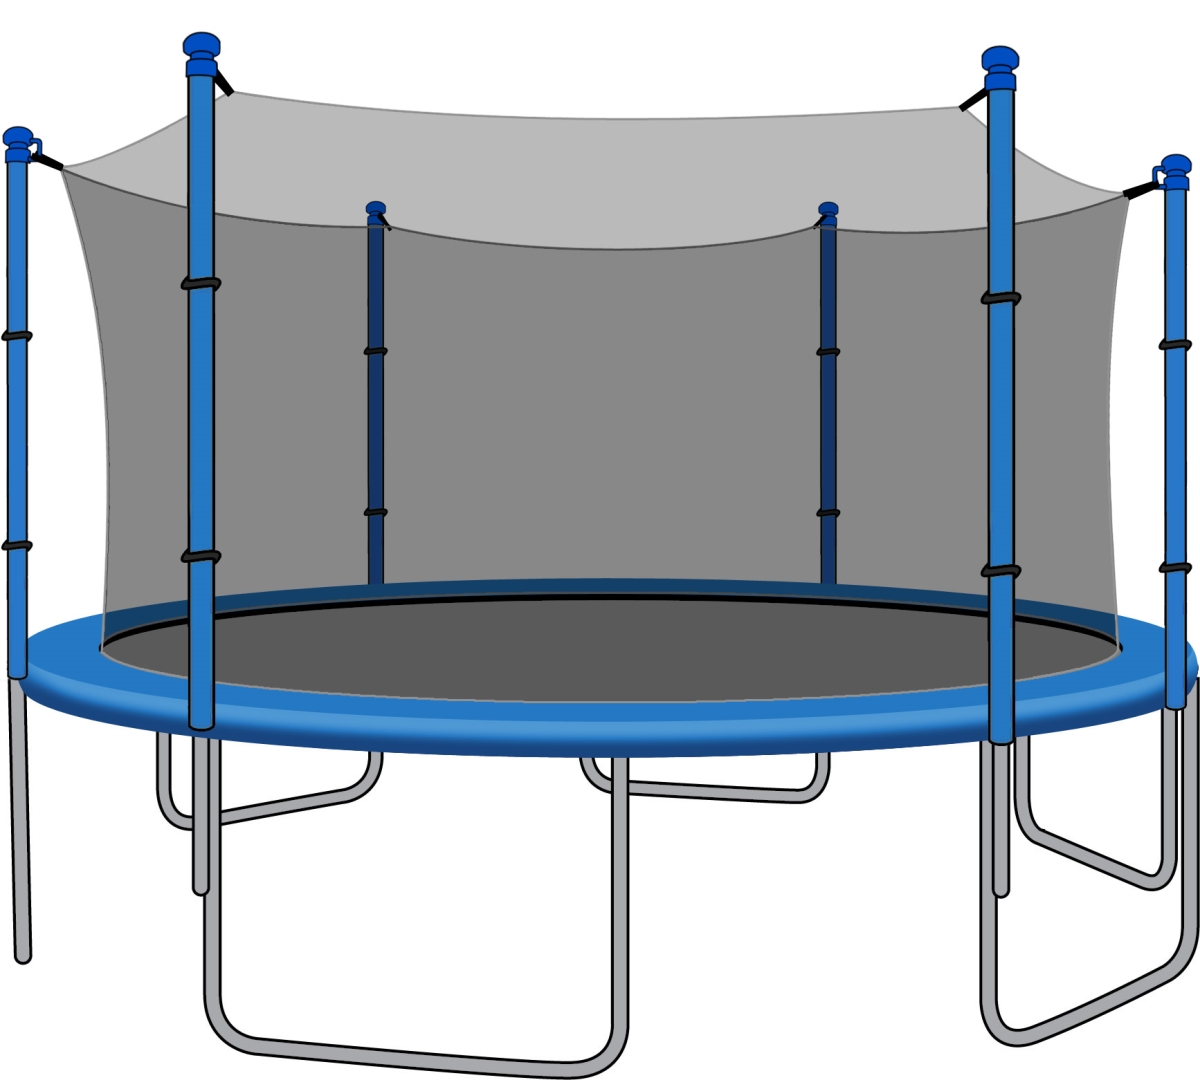 Netjz-1206st0000 12ft. Trampoline Net For Trampolines Using 6 Straight Poles Or 3 Arches